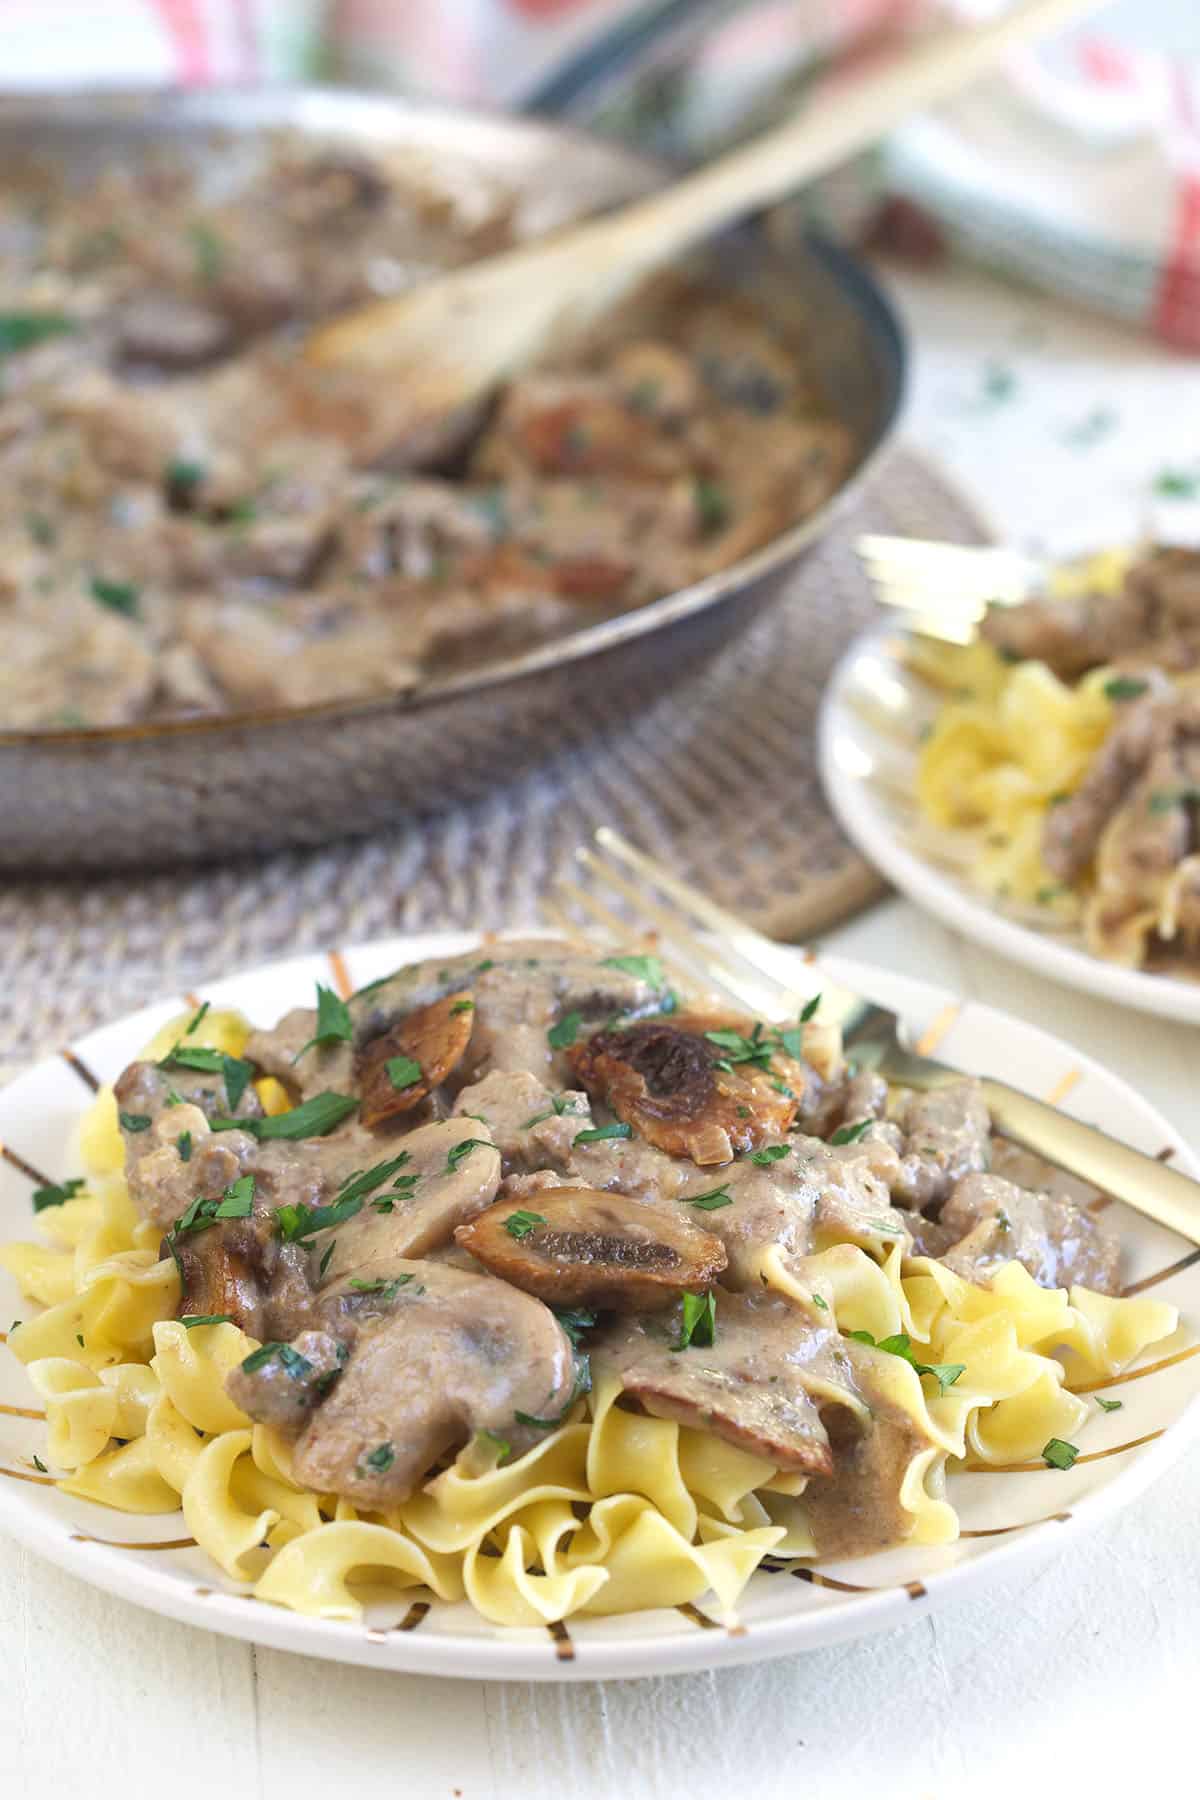 A plate of egg noodles and stroganoff is placed next to a skillet with a wooden spoon.